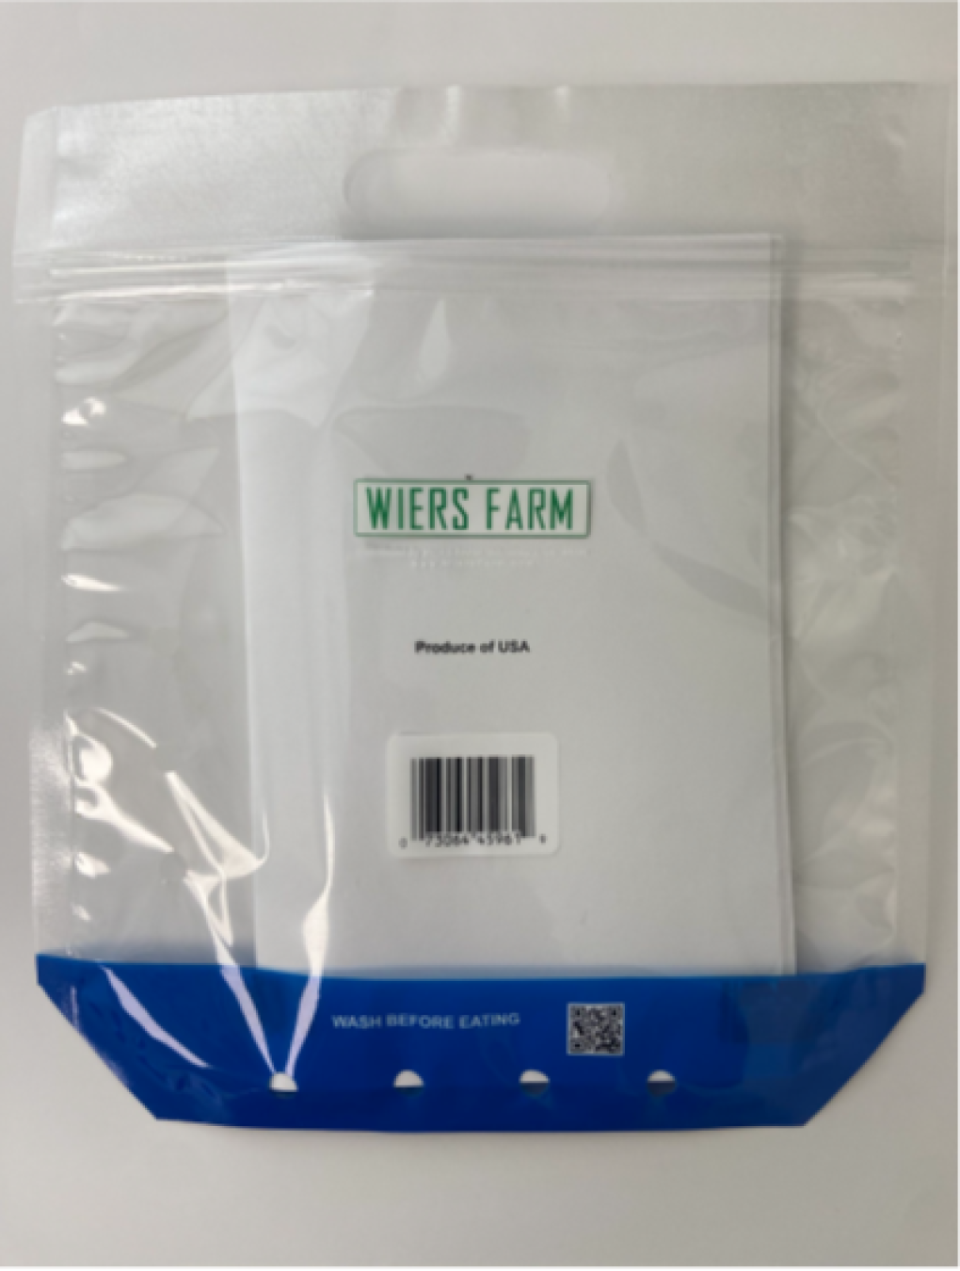 Example of packaging for Wiers Farm cucumbers that were recalled in July 2024 due to possible contamination with listeria.